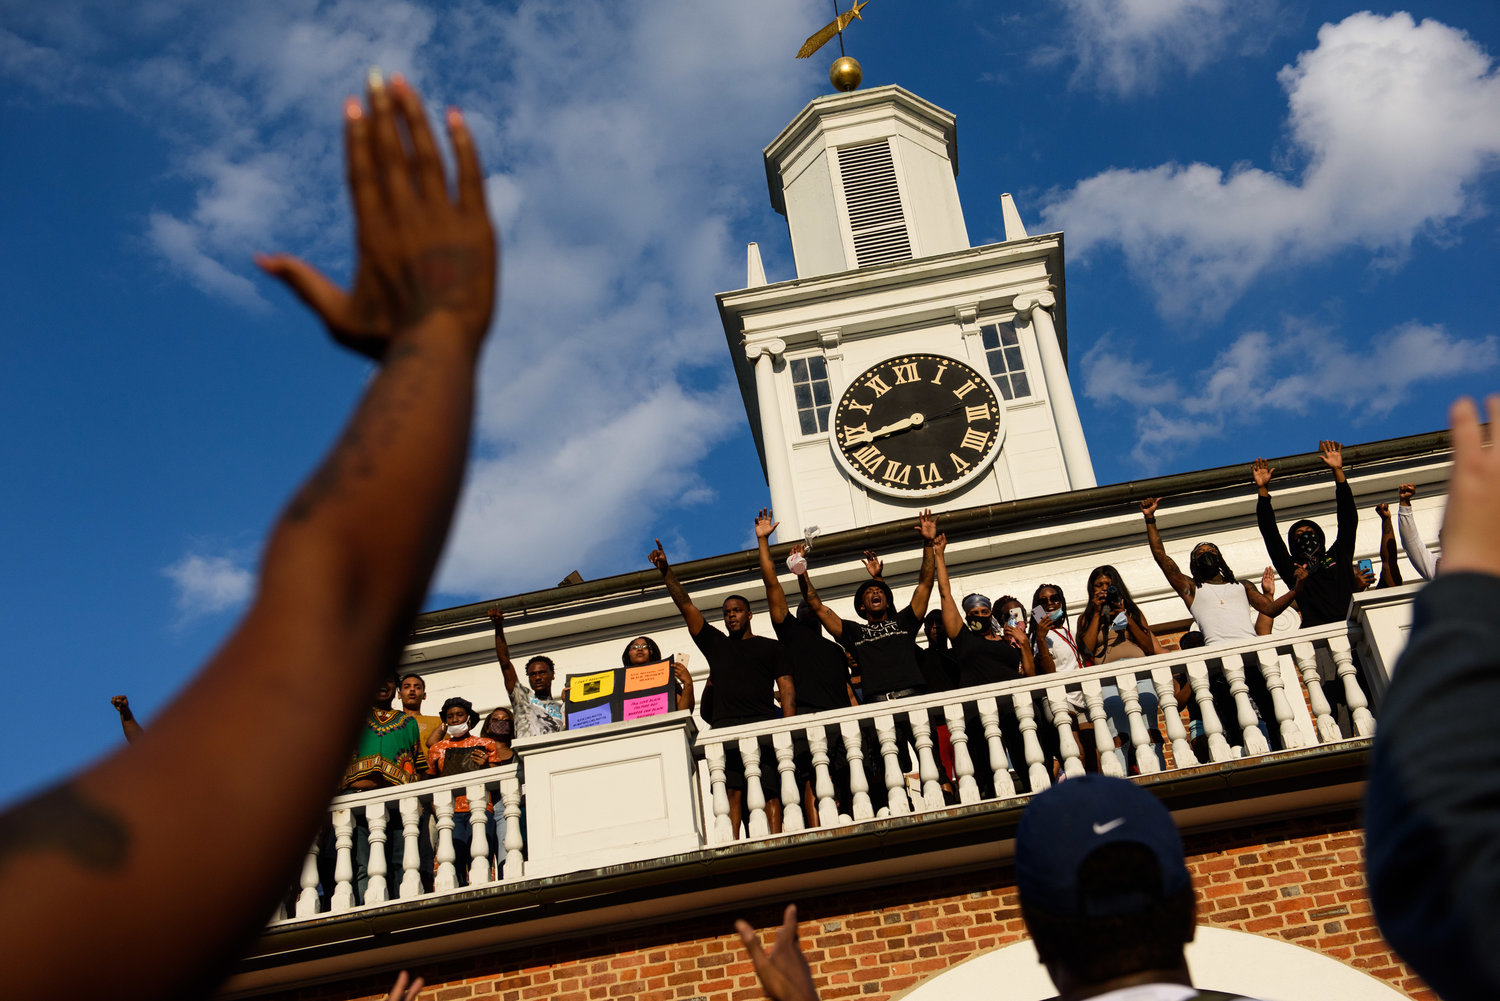 People gather on the balcony of the Market House during a protest on May 30, 2020. Damage that was done to the building has been repaired, and the city is preparing to remove the fencing that has surrounded the structure.